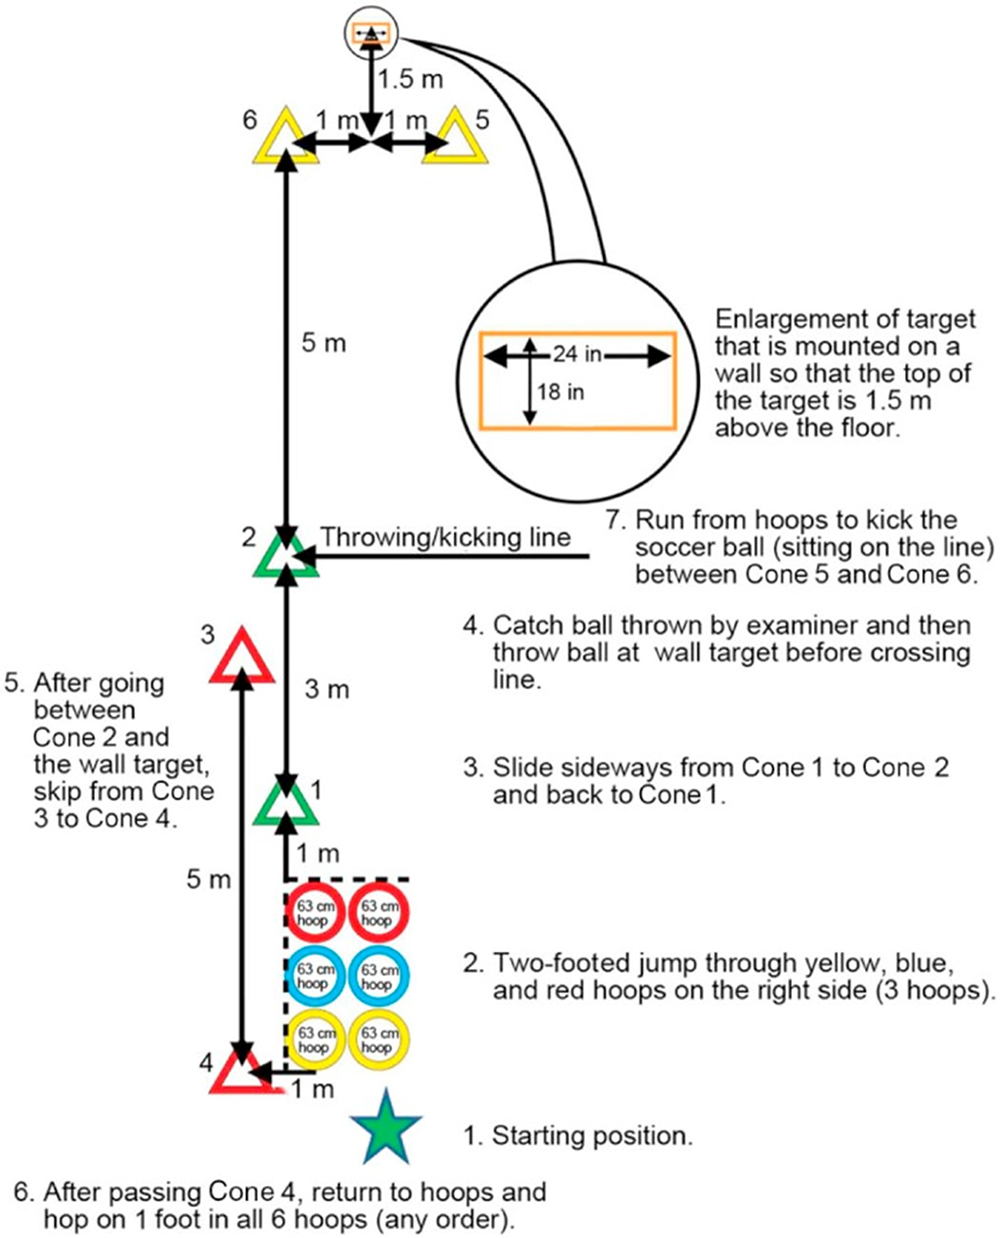 Fig. 1: Set up for the CAMSA assessment.
Set up cone for starting position then in front of that, set up 2 rows of 3 x 63 centimetre hoops. Begin with 2 yellow hoops, 2 blue hoops and then 2 red hoops.
1 metre from the hoop, set up a green cone. Set up another green cone 3 metres in front of the first. At this cone, use masking tape to create a throwing and kicking line on the floor (the throwing and kicking line)
Set up a yellow cone, 5 metres in front of the second green cone. Place another yellow cone 2 metres to the right of the first yellow cone (these cones should be touching a wall)
One the wall between the two yellow cones, use masking tape to create a target 1.5 metres from the ground. The target should be a rectangle 24 inches in length and 18 inches in height.
1 metre to the left of the yellow hoop, set up a red cone. 5 metres in front of that cone, set up another red cone.